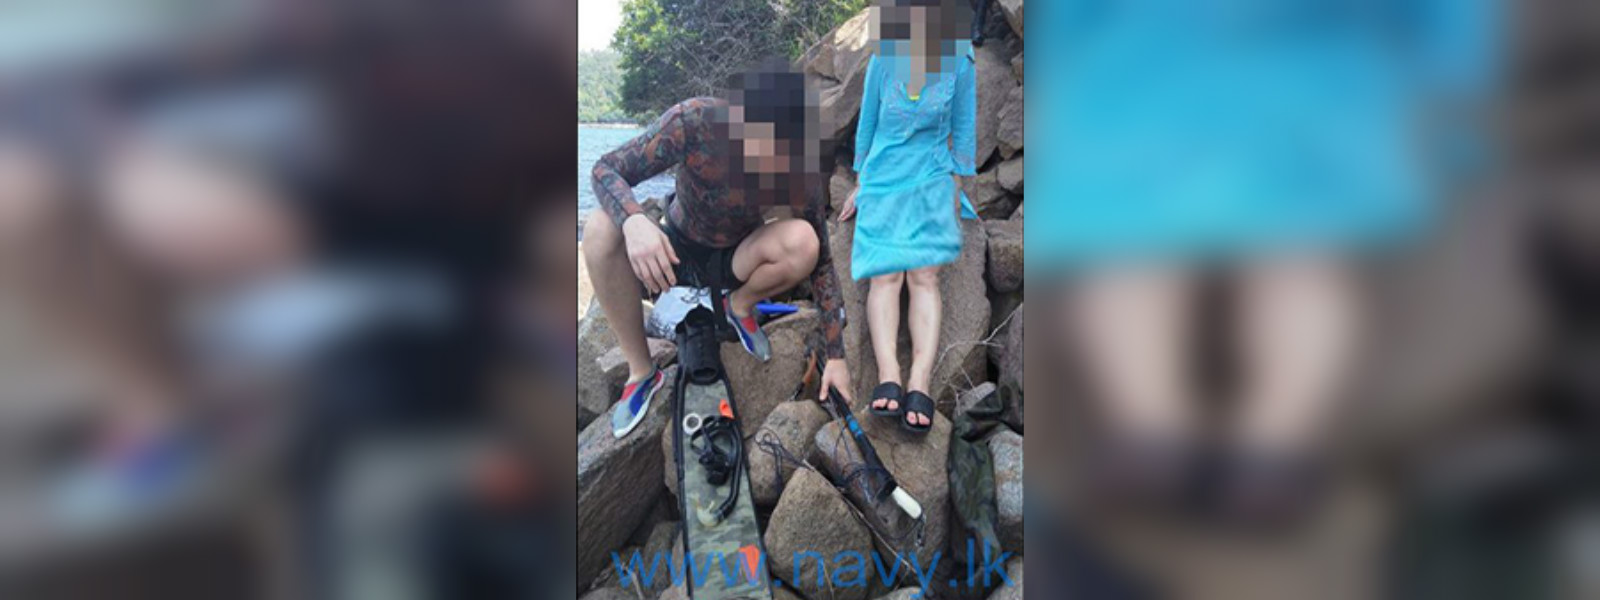 Two Ukranian nationals arrested for spearfishing